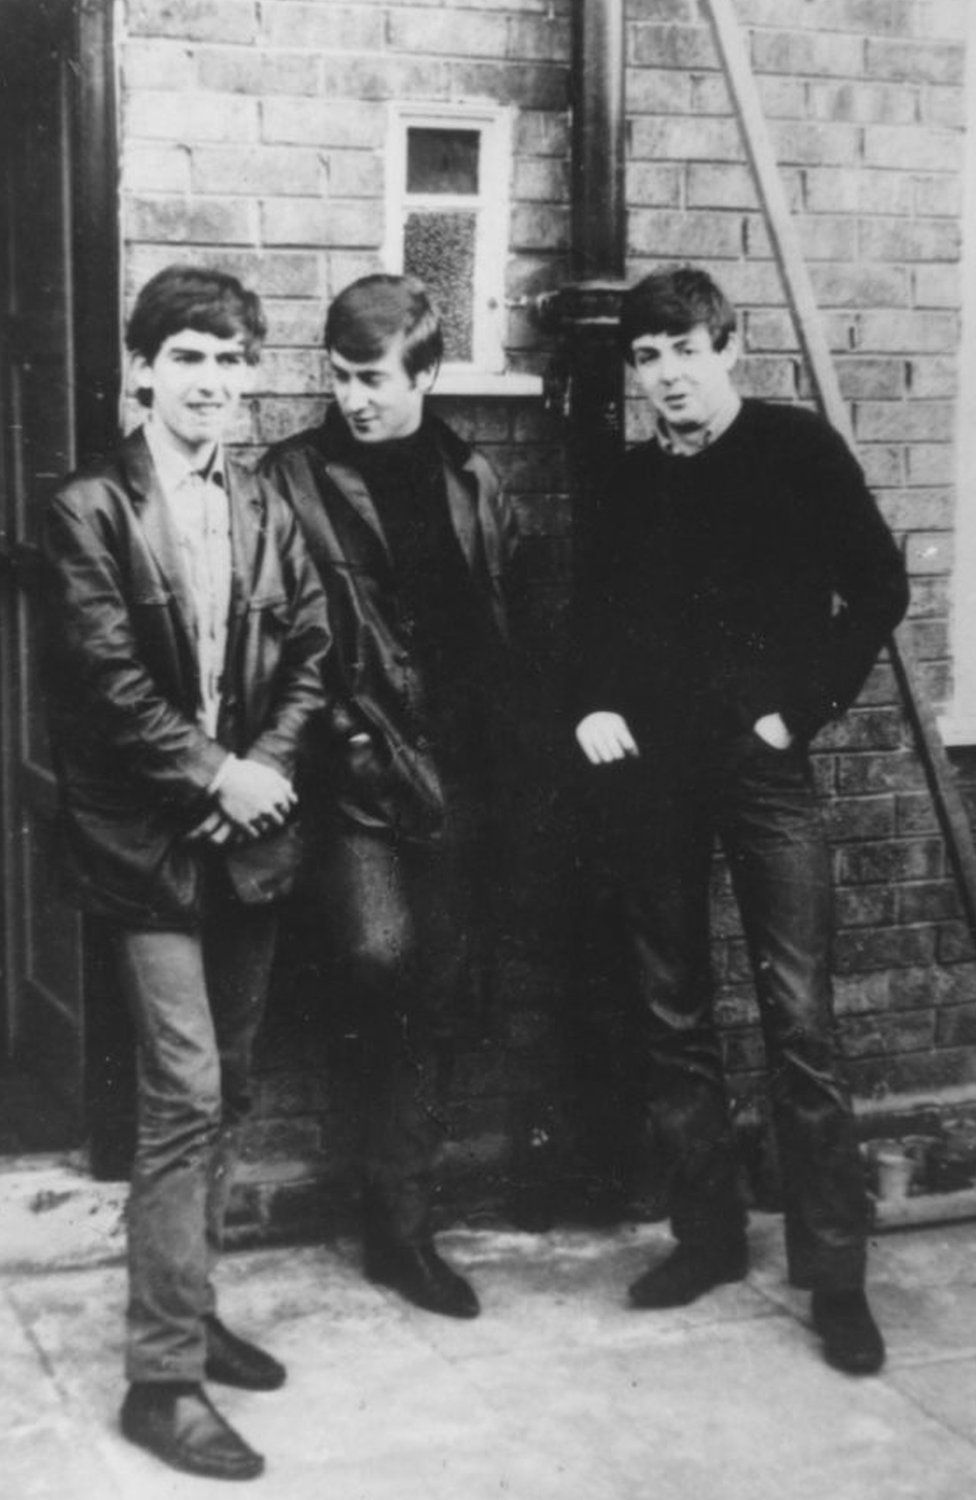 circa 1960: Liverpudlian skiffle beat band The Beatles standing outside Paul's Liverpool home (left to right) George Harrison (1943 - 2001), John Lennon (1940 - 1980), Paul McCartney. Ringo Starr was not to join the band for another two years.